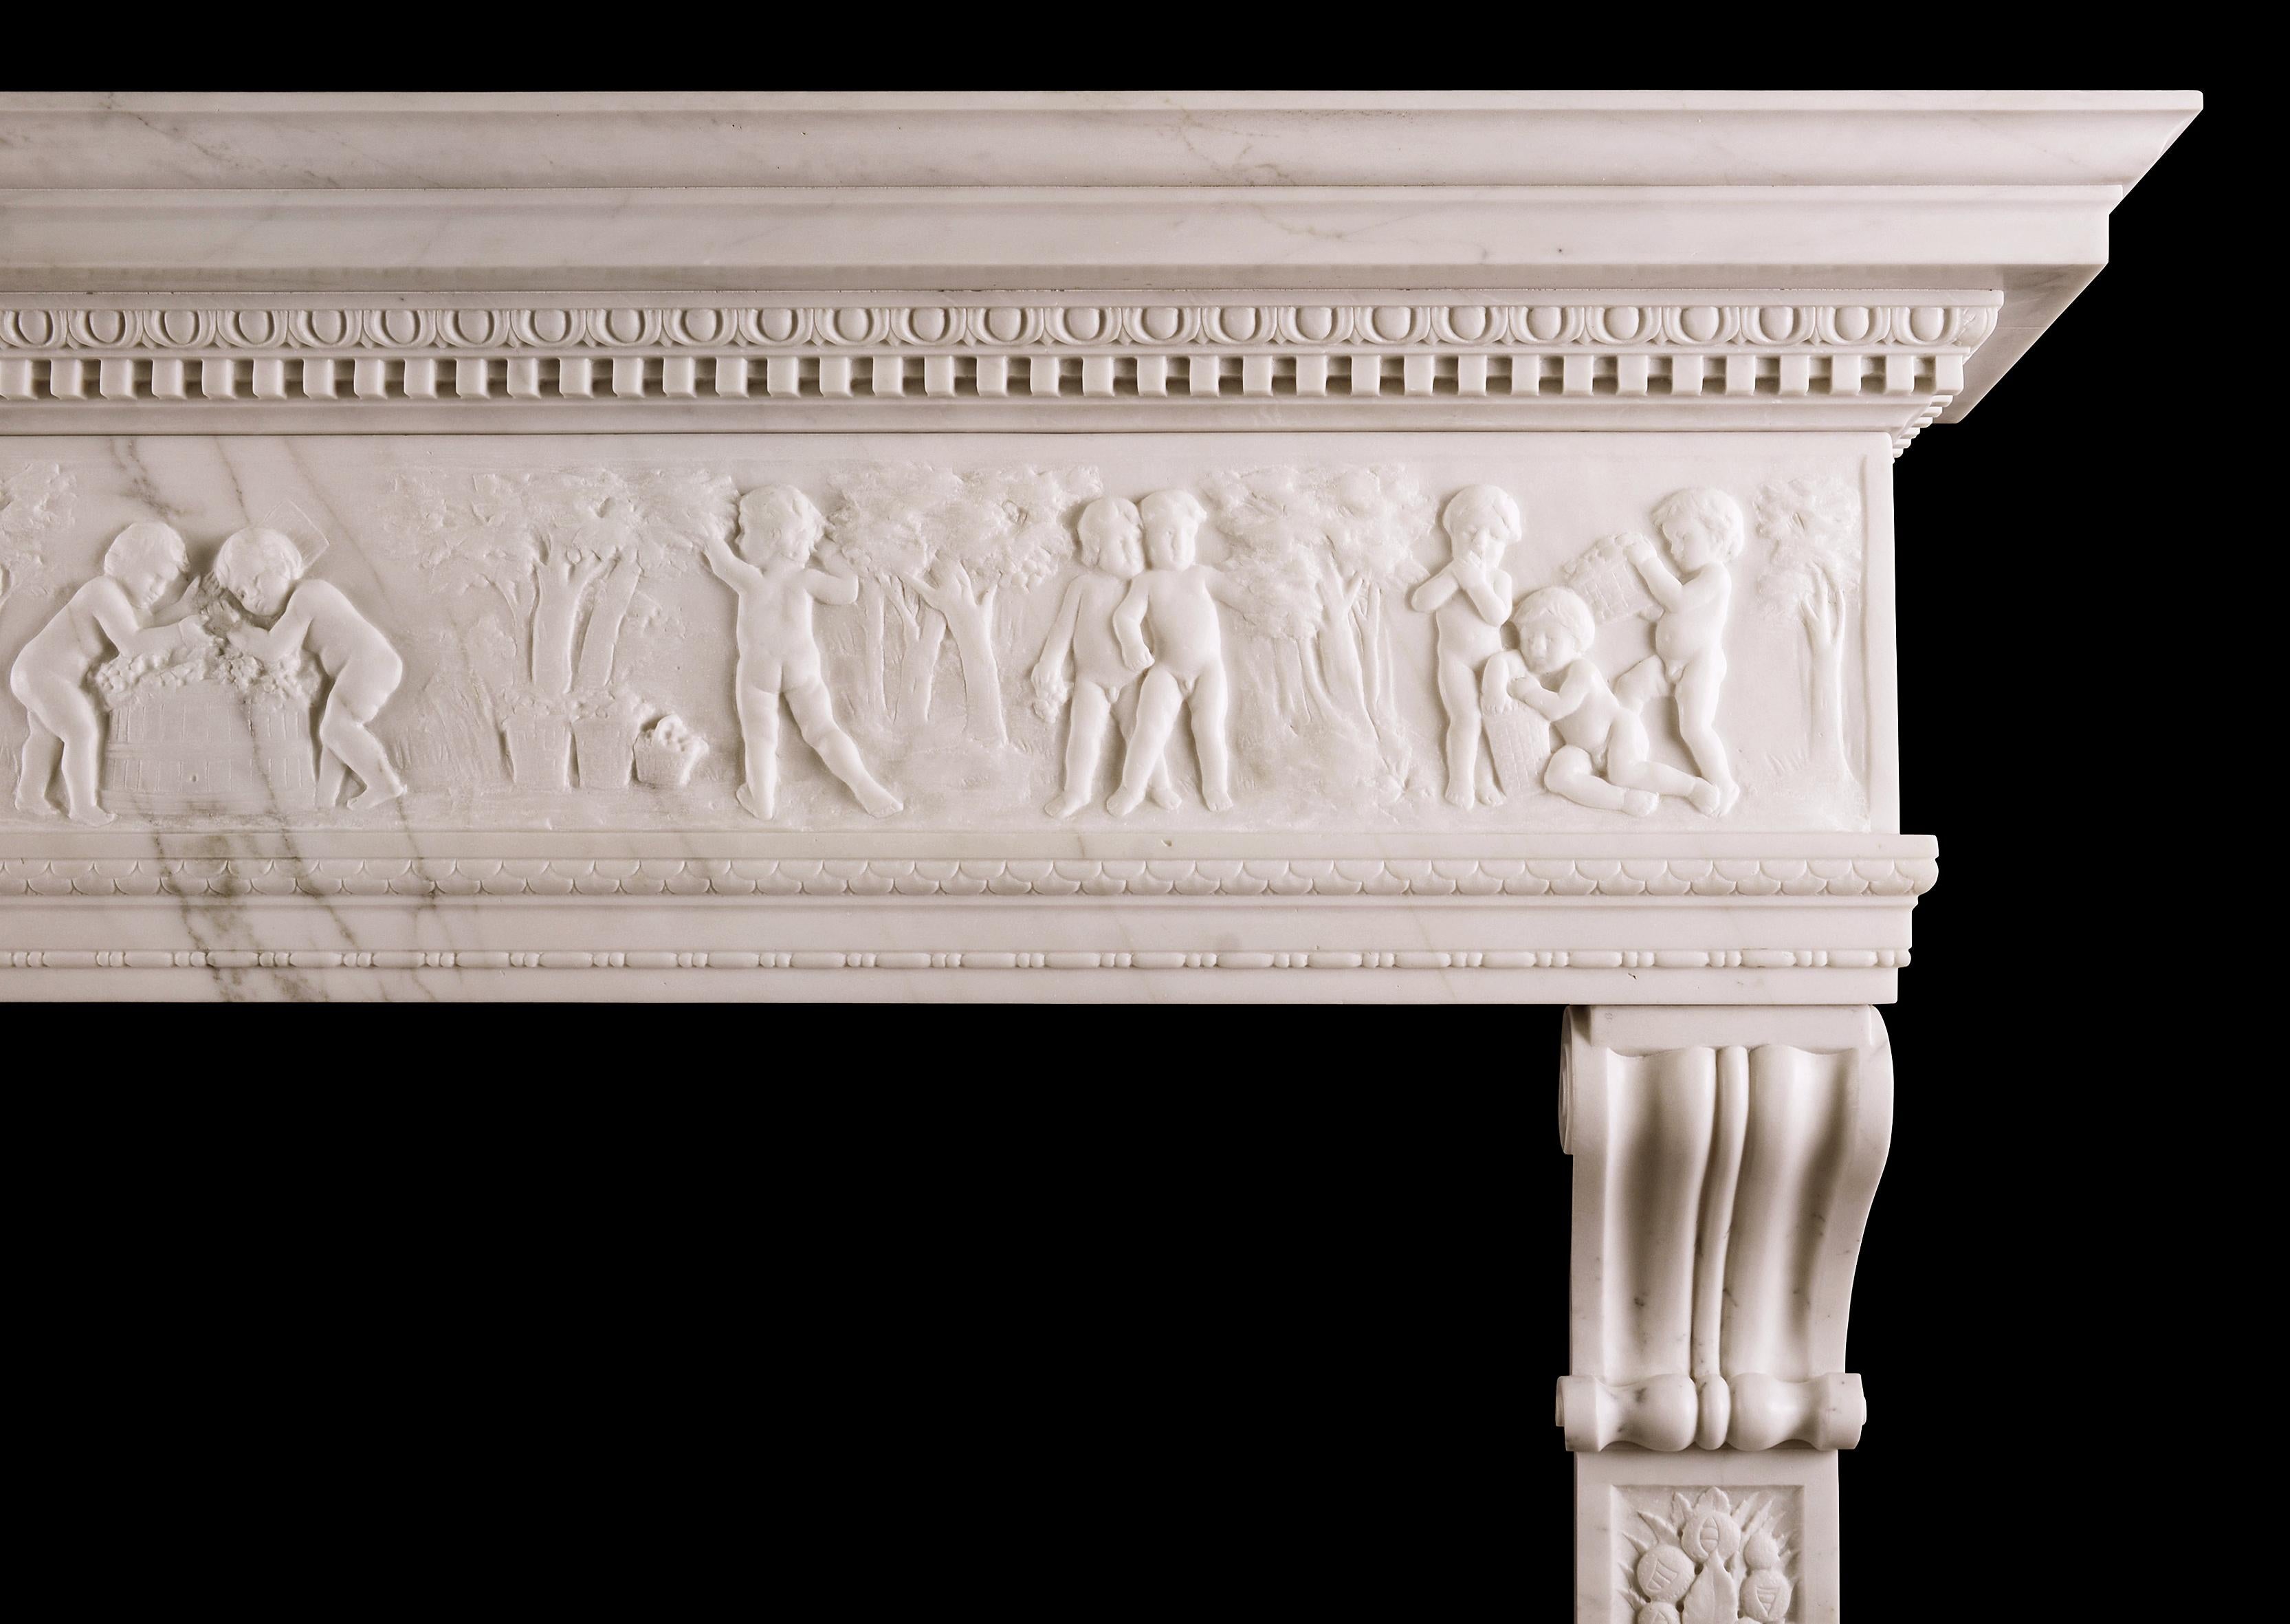 A very fine statuary white marble fireplace in the Italian Renaissance manner. The carved jambs featuring classical amphorae surmounted by fruit, acorns, ribbons and foliage topped with finely carved scrolled brackets. The carved frieze with putti